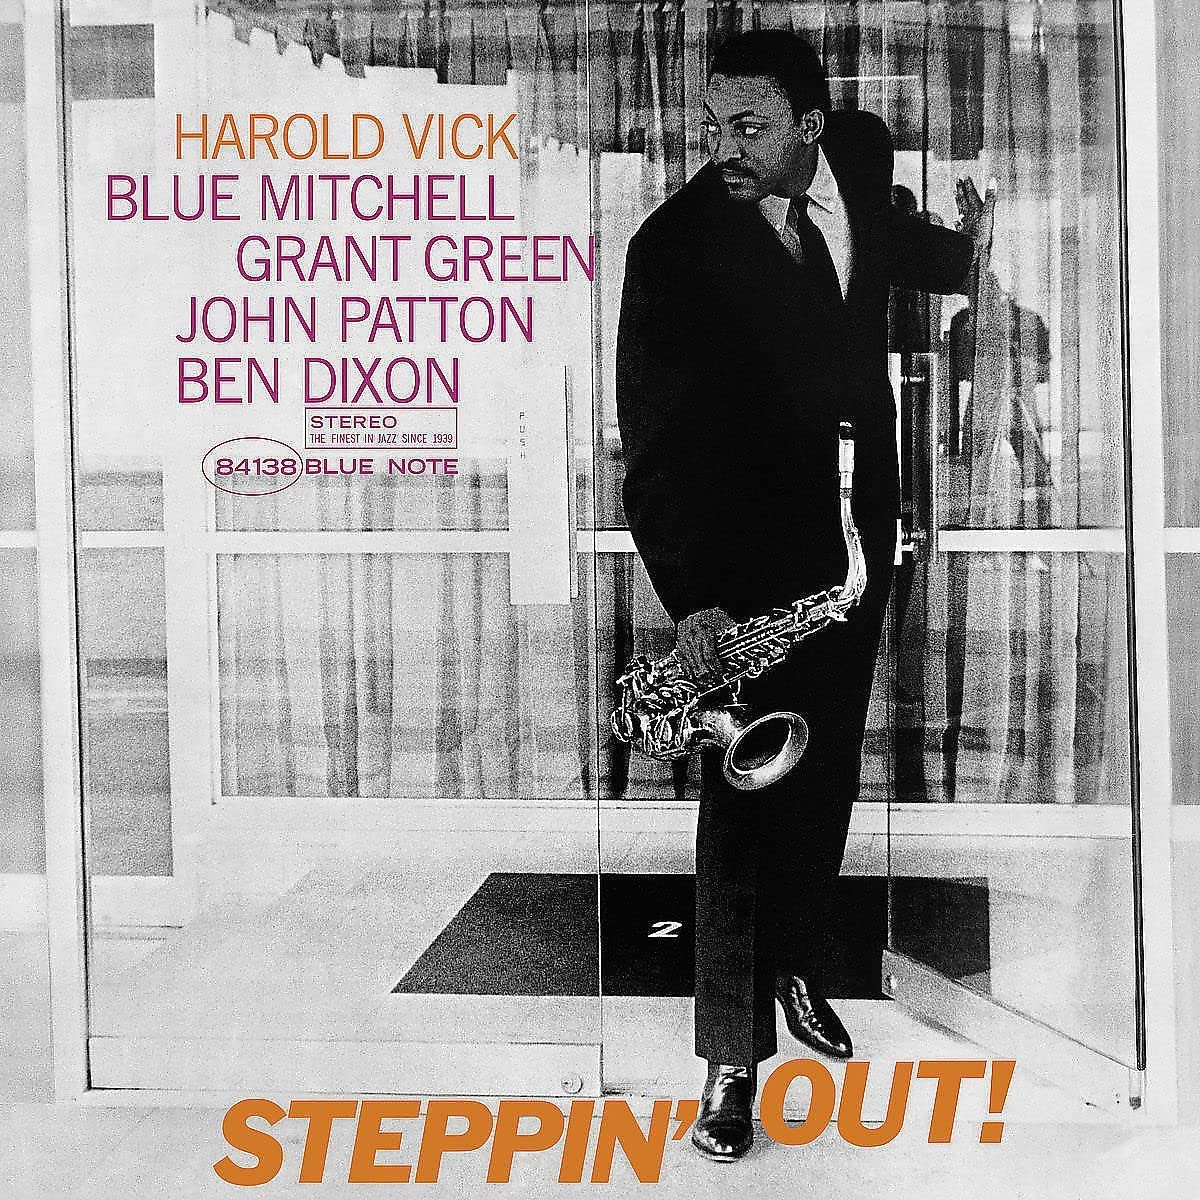 Vick, Harold/Steppin' Out (Blue Note Tone Poet) [LP]